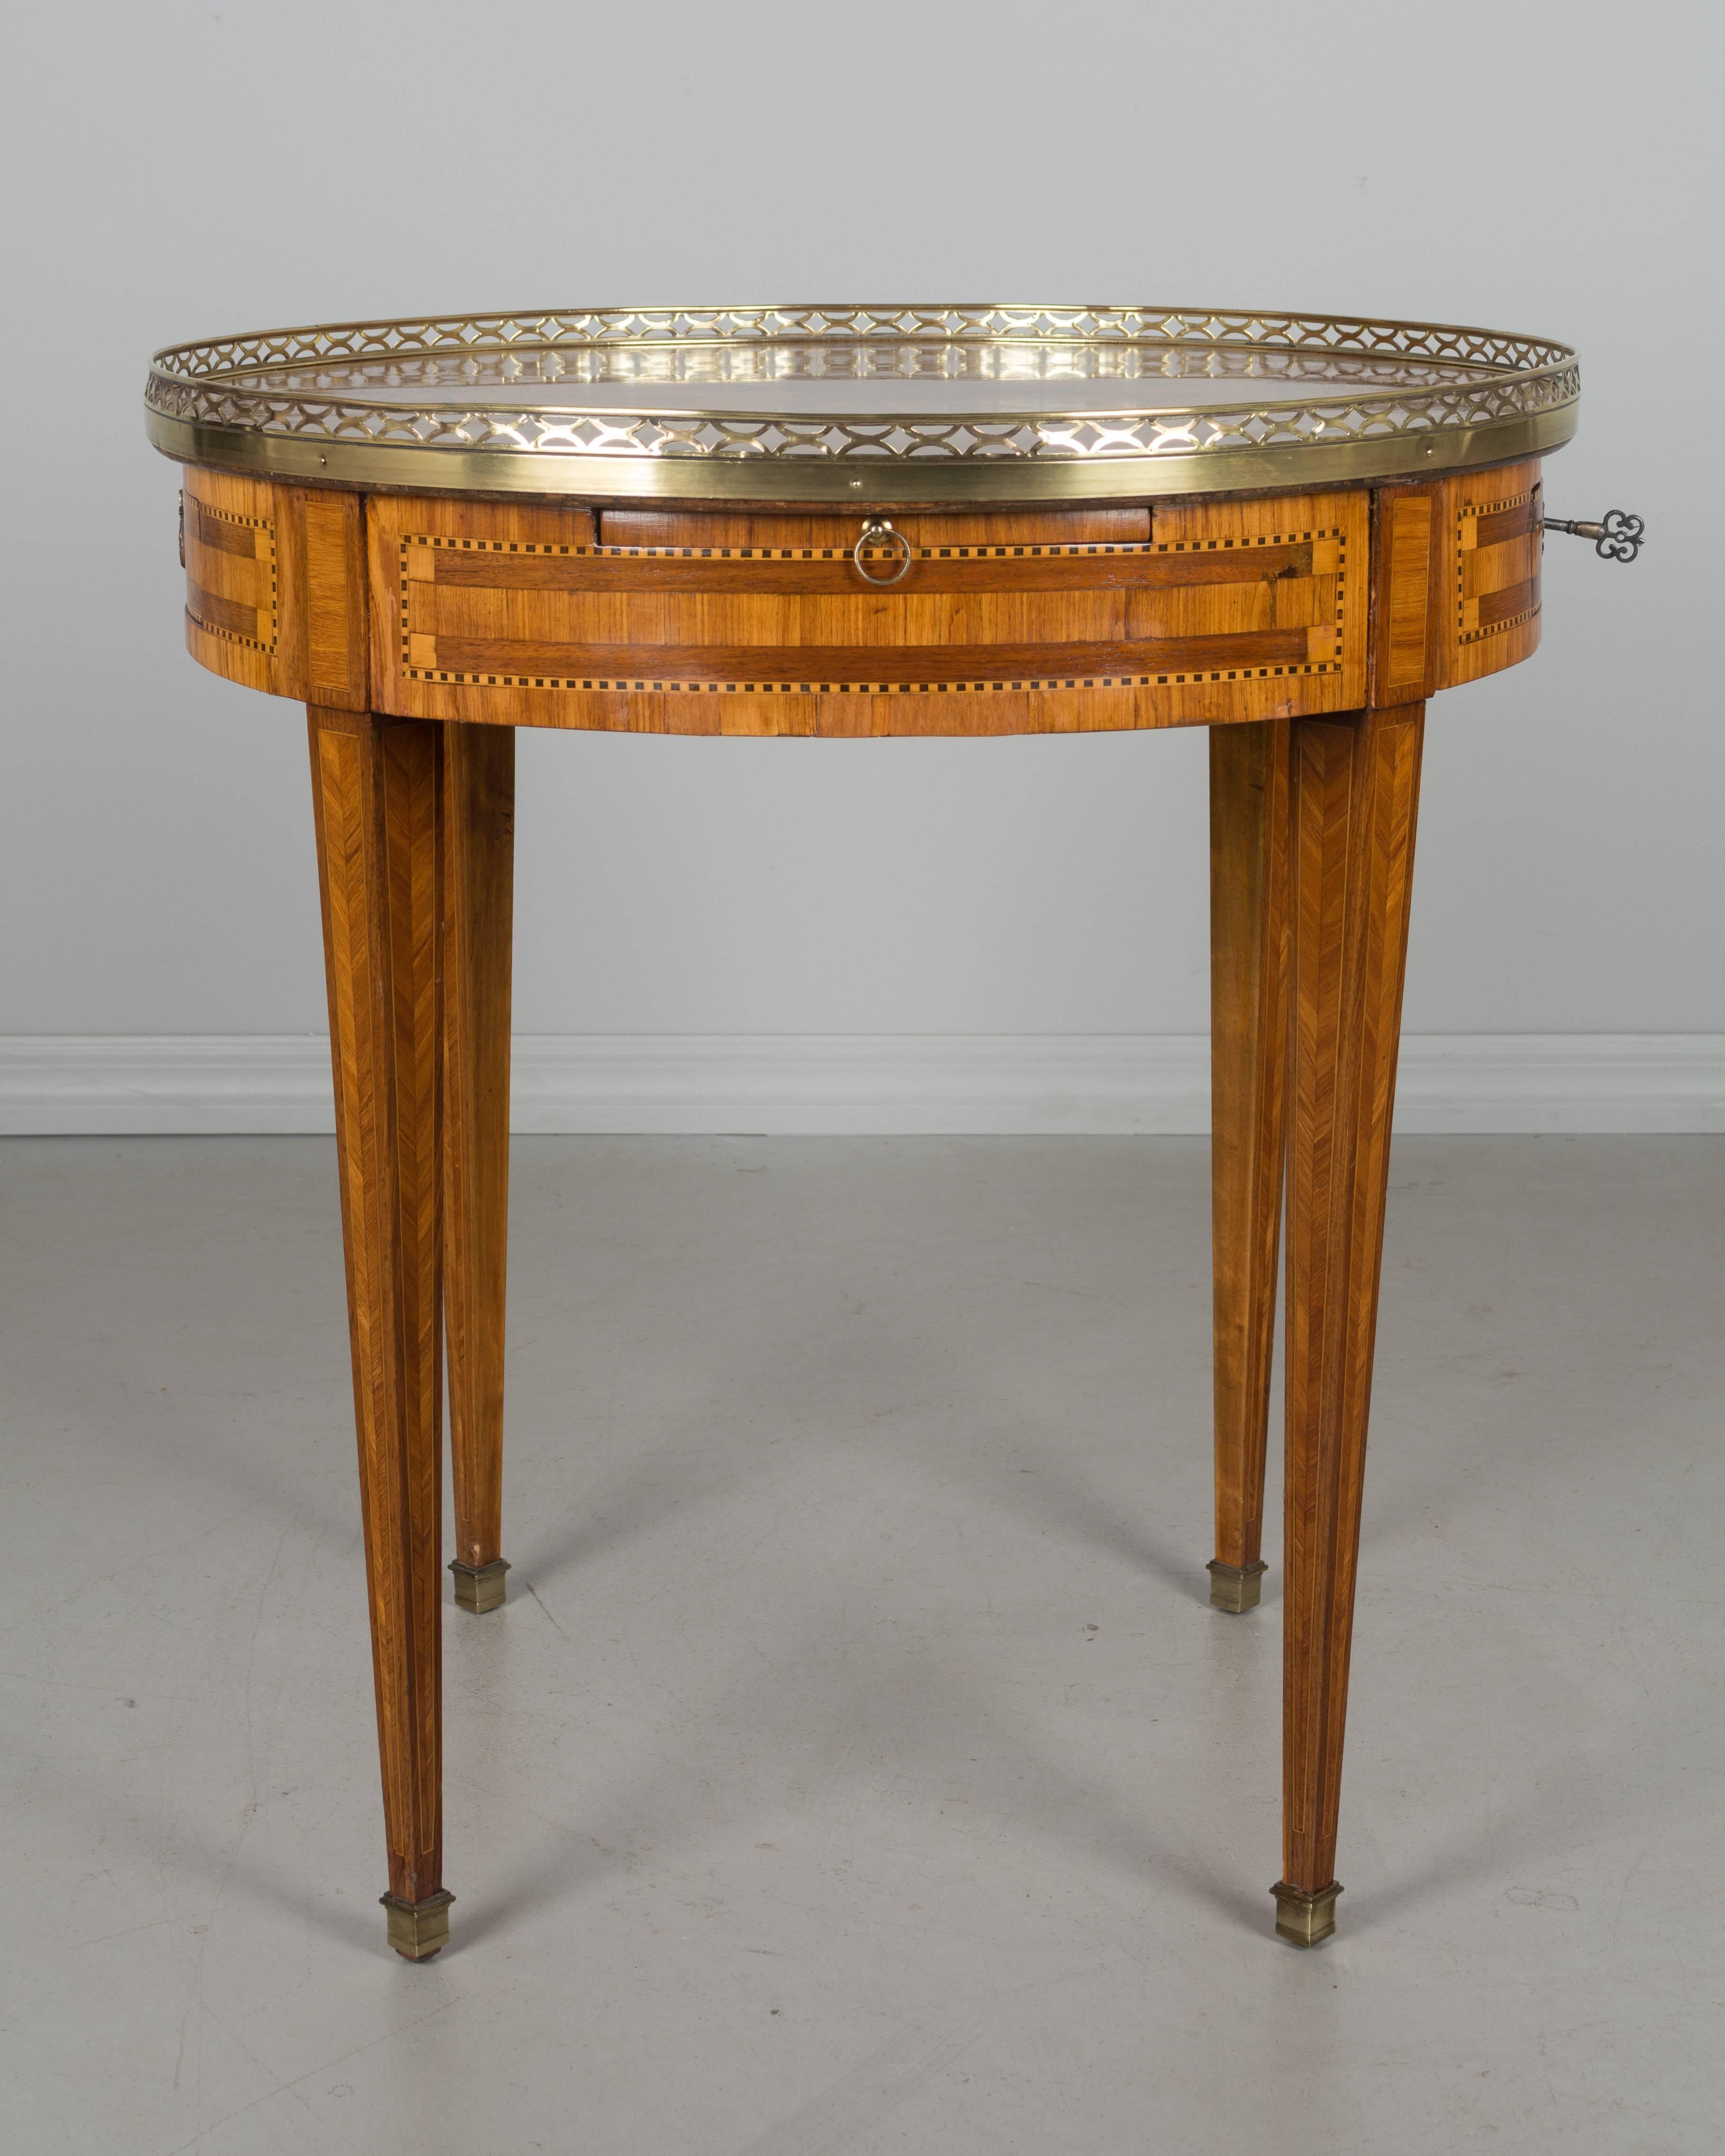 French Louis XVI style bouillotte table made of veneers of rosewood, tulipwood and mahogany. Two dovetailed drawers and two pull-out shelves with leather surface. Fine marquetry inlay of musical instruments on the top surrounded by a polished brass